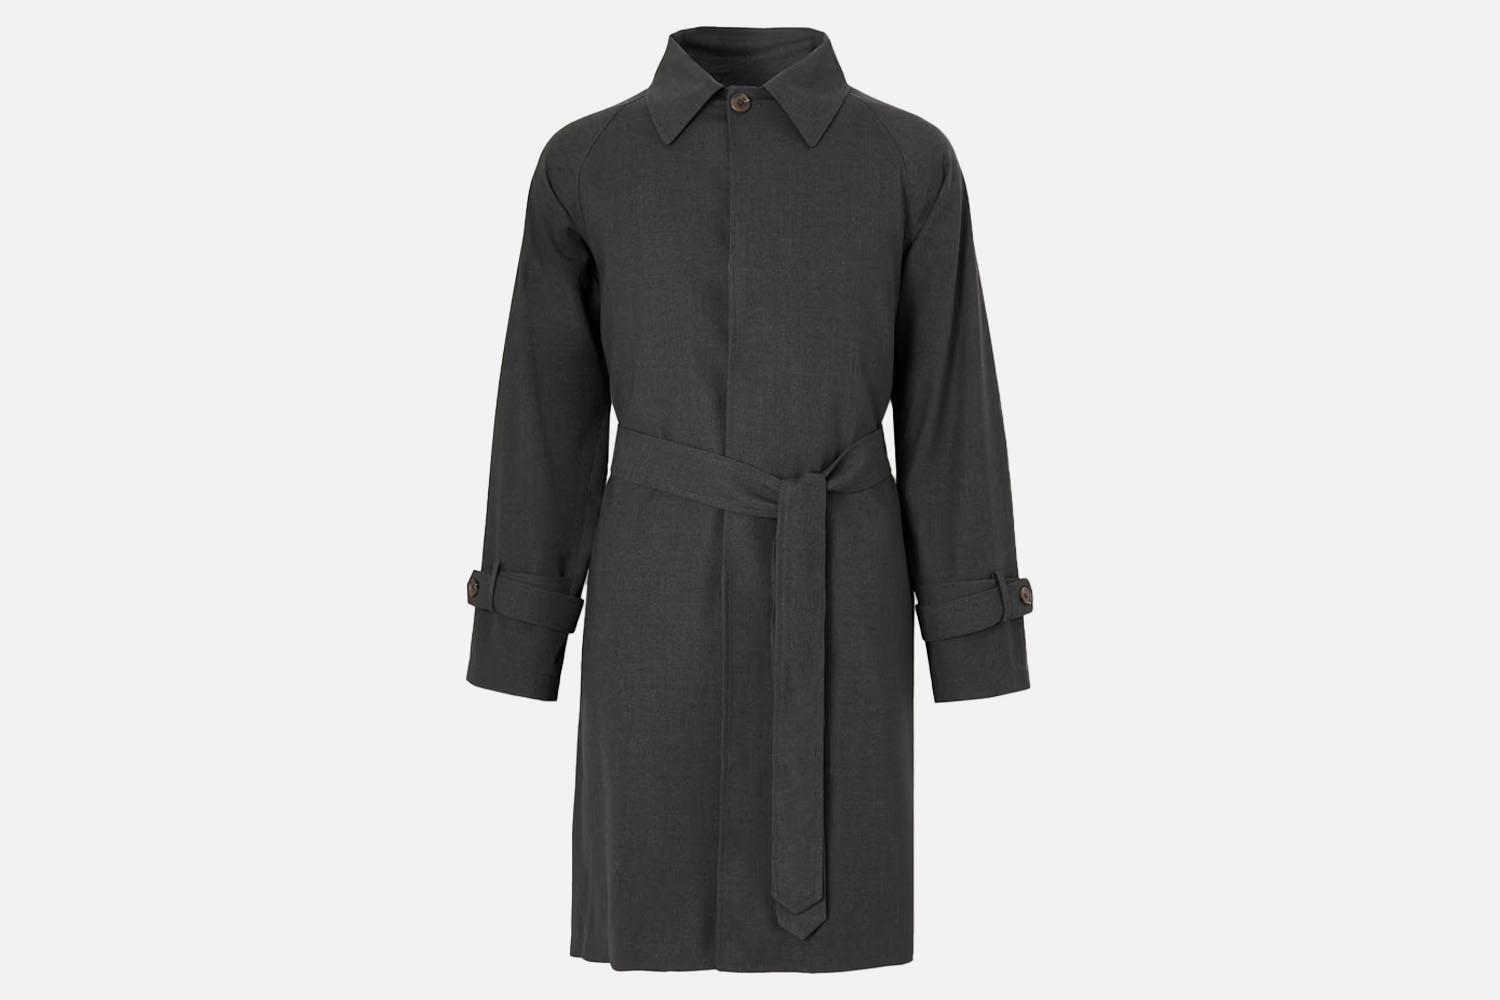 Stòffa Belted Wool Trench Coat